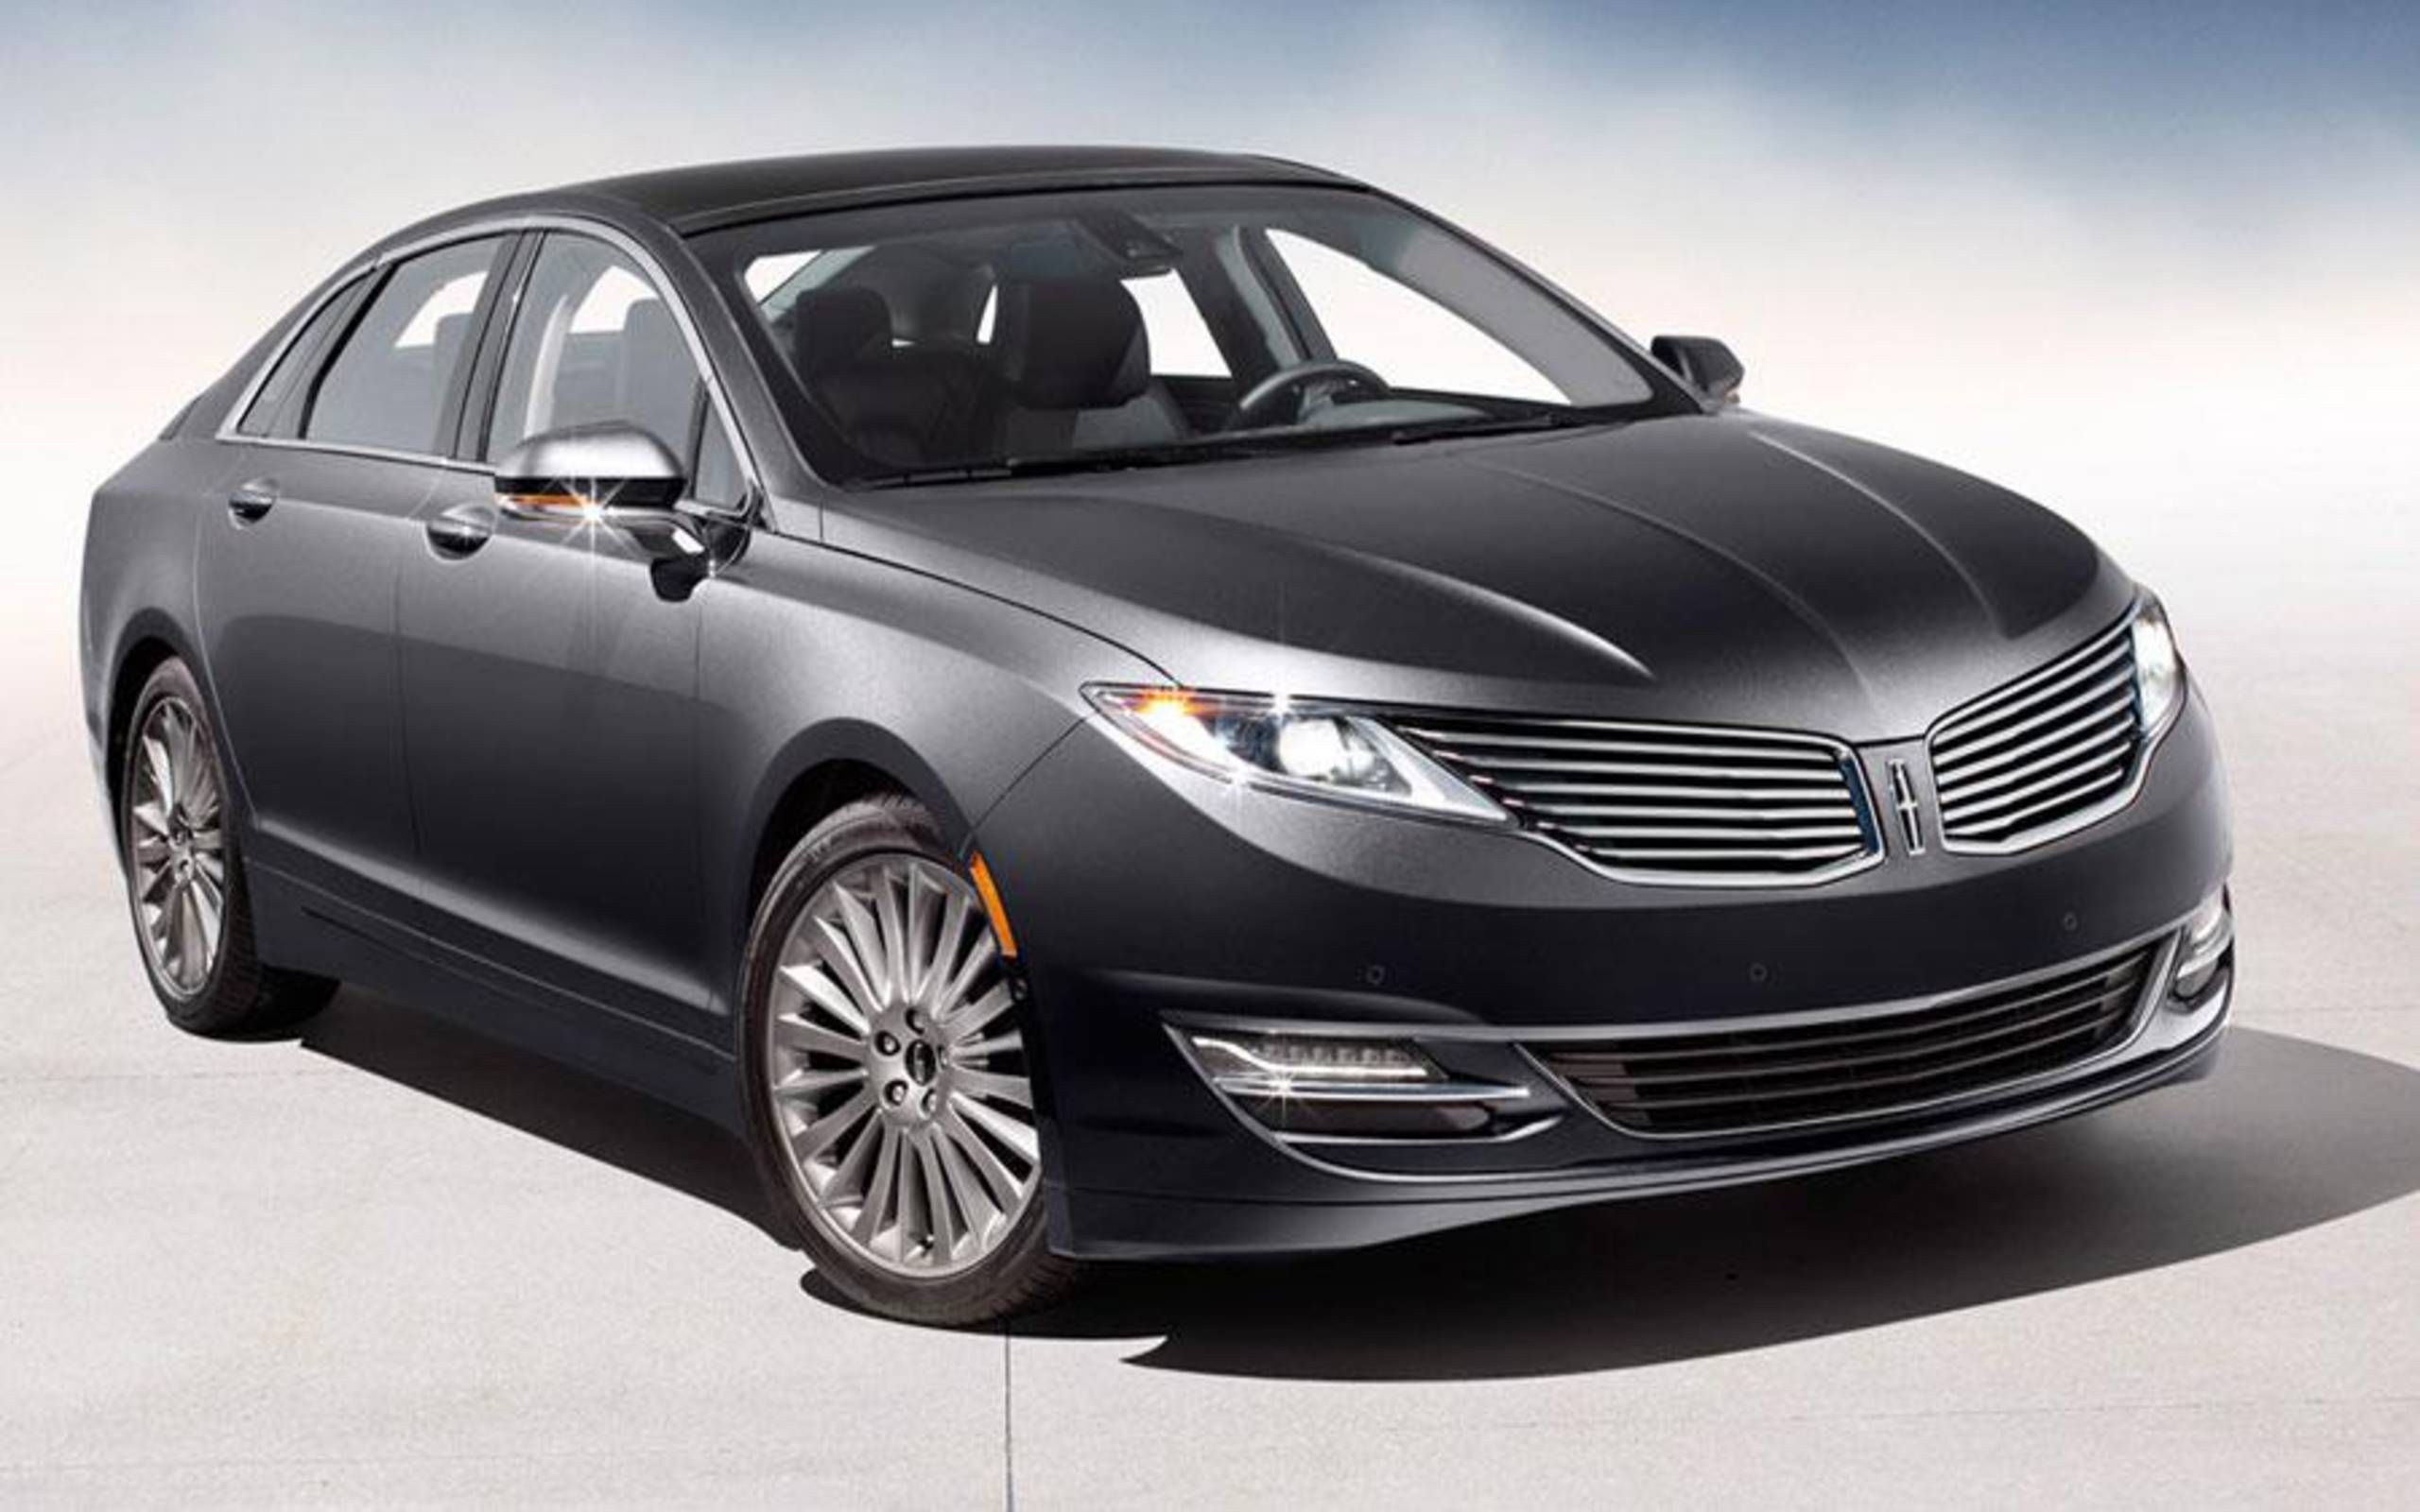 2013 Lincoln MKZ 3.7L review notes